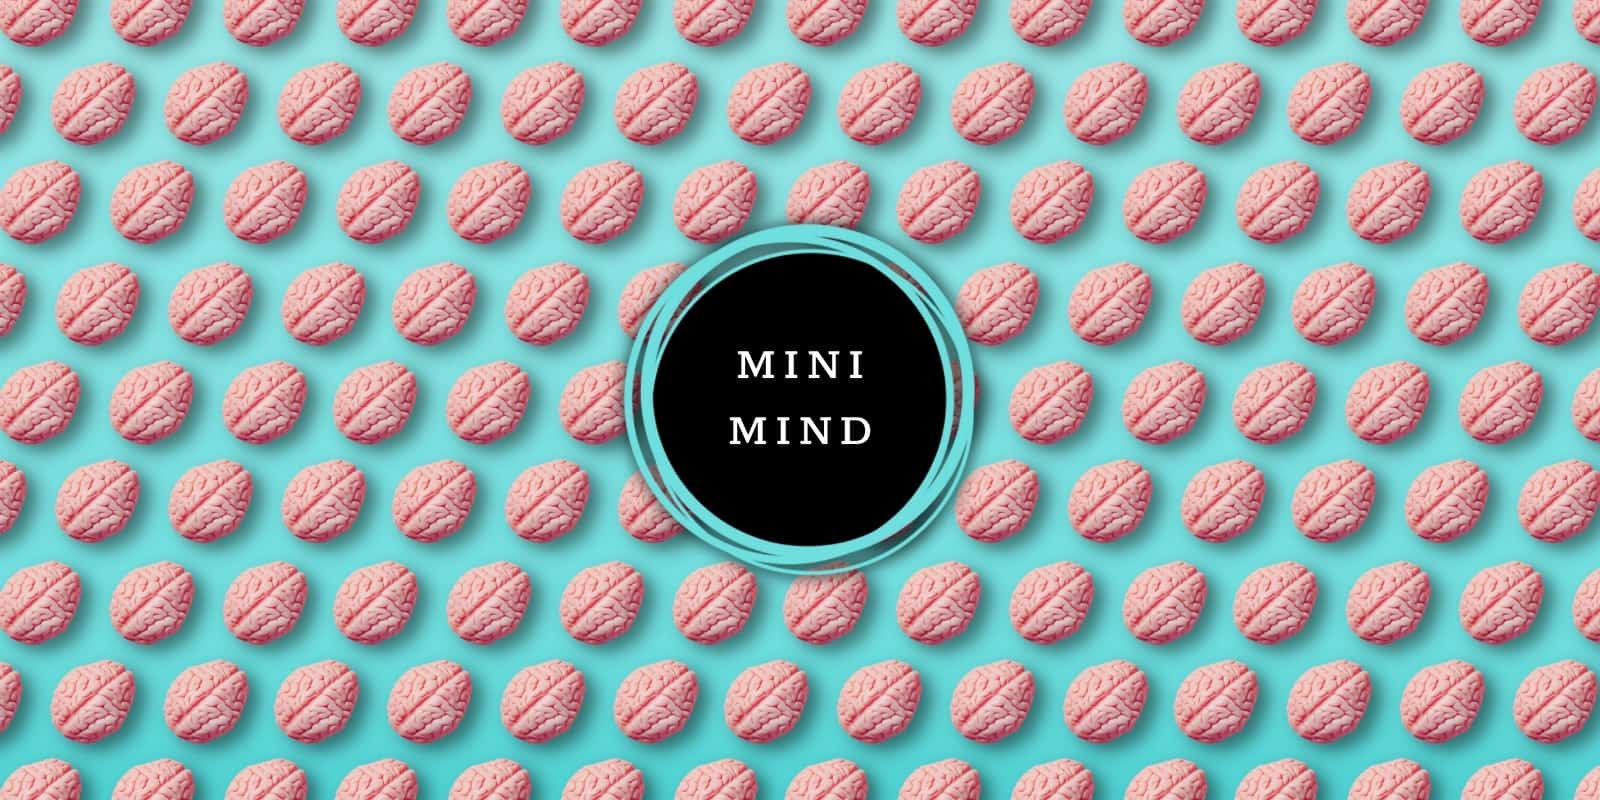 Introducing “Mini Mind” — 365 Daily Emails of Bite-Size Brain Food